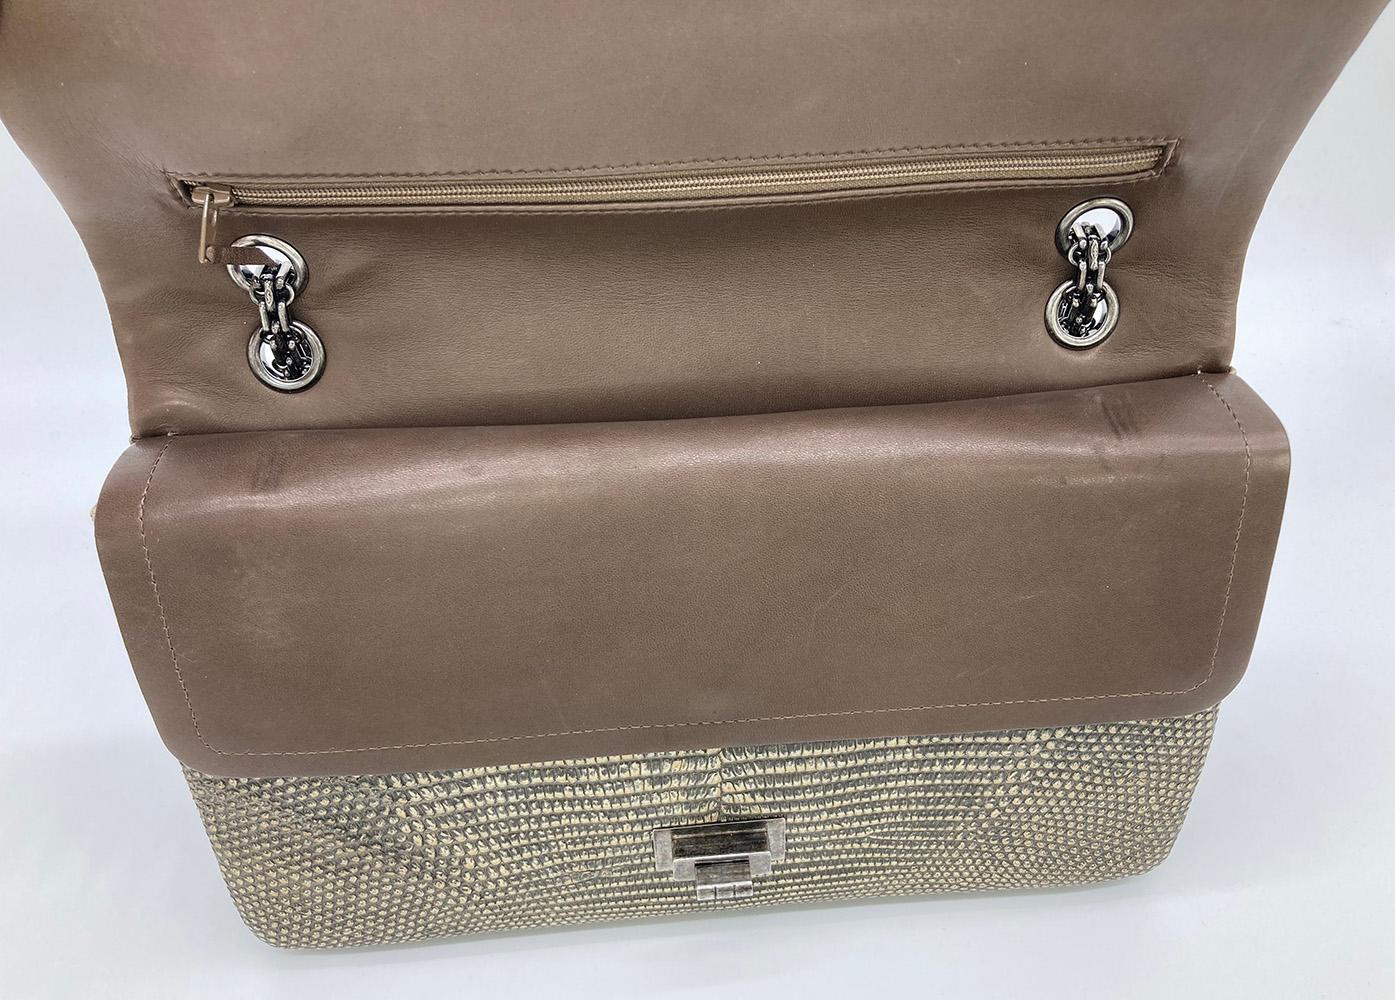 Chanel Natural Lizard Double Flap Classic 227 Reissue in excellent condition. Natural beige lizard trimmed with antiqued ruthenium hardware. signature reissue mademoiselle twist lock closure opens via double flap to a brown lambskin interior with 2